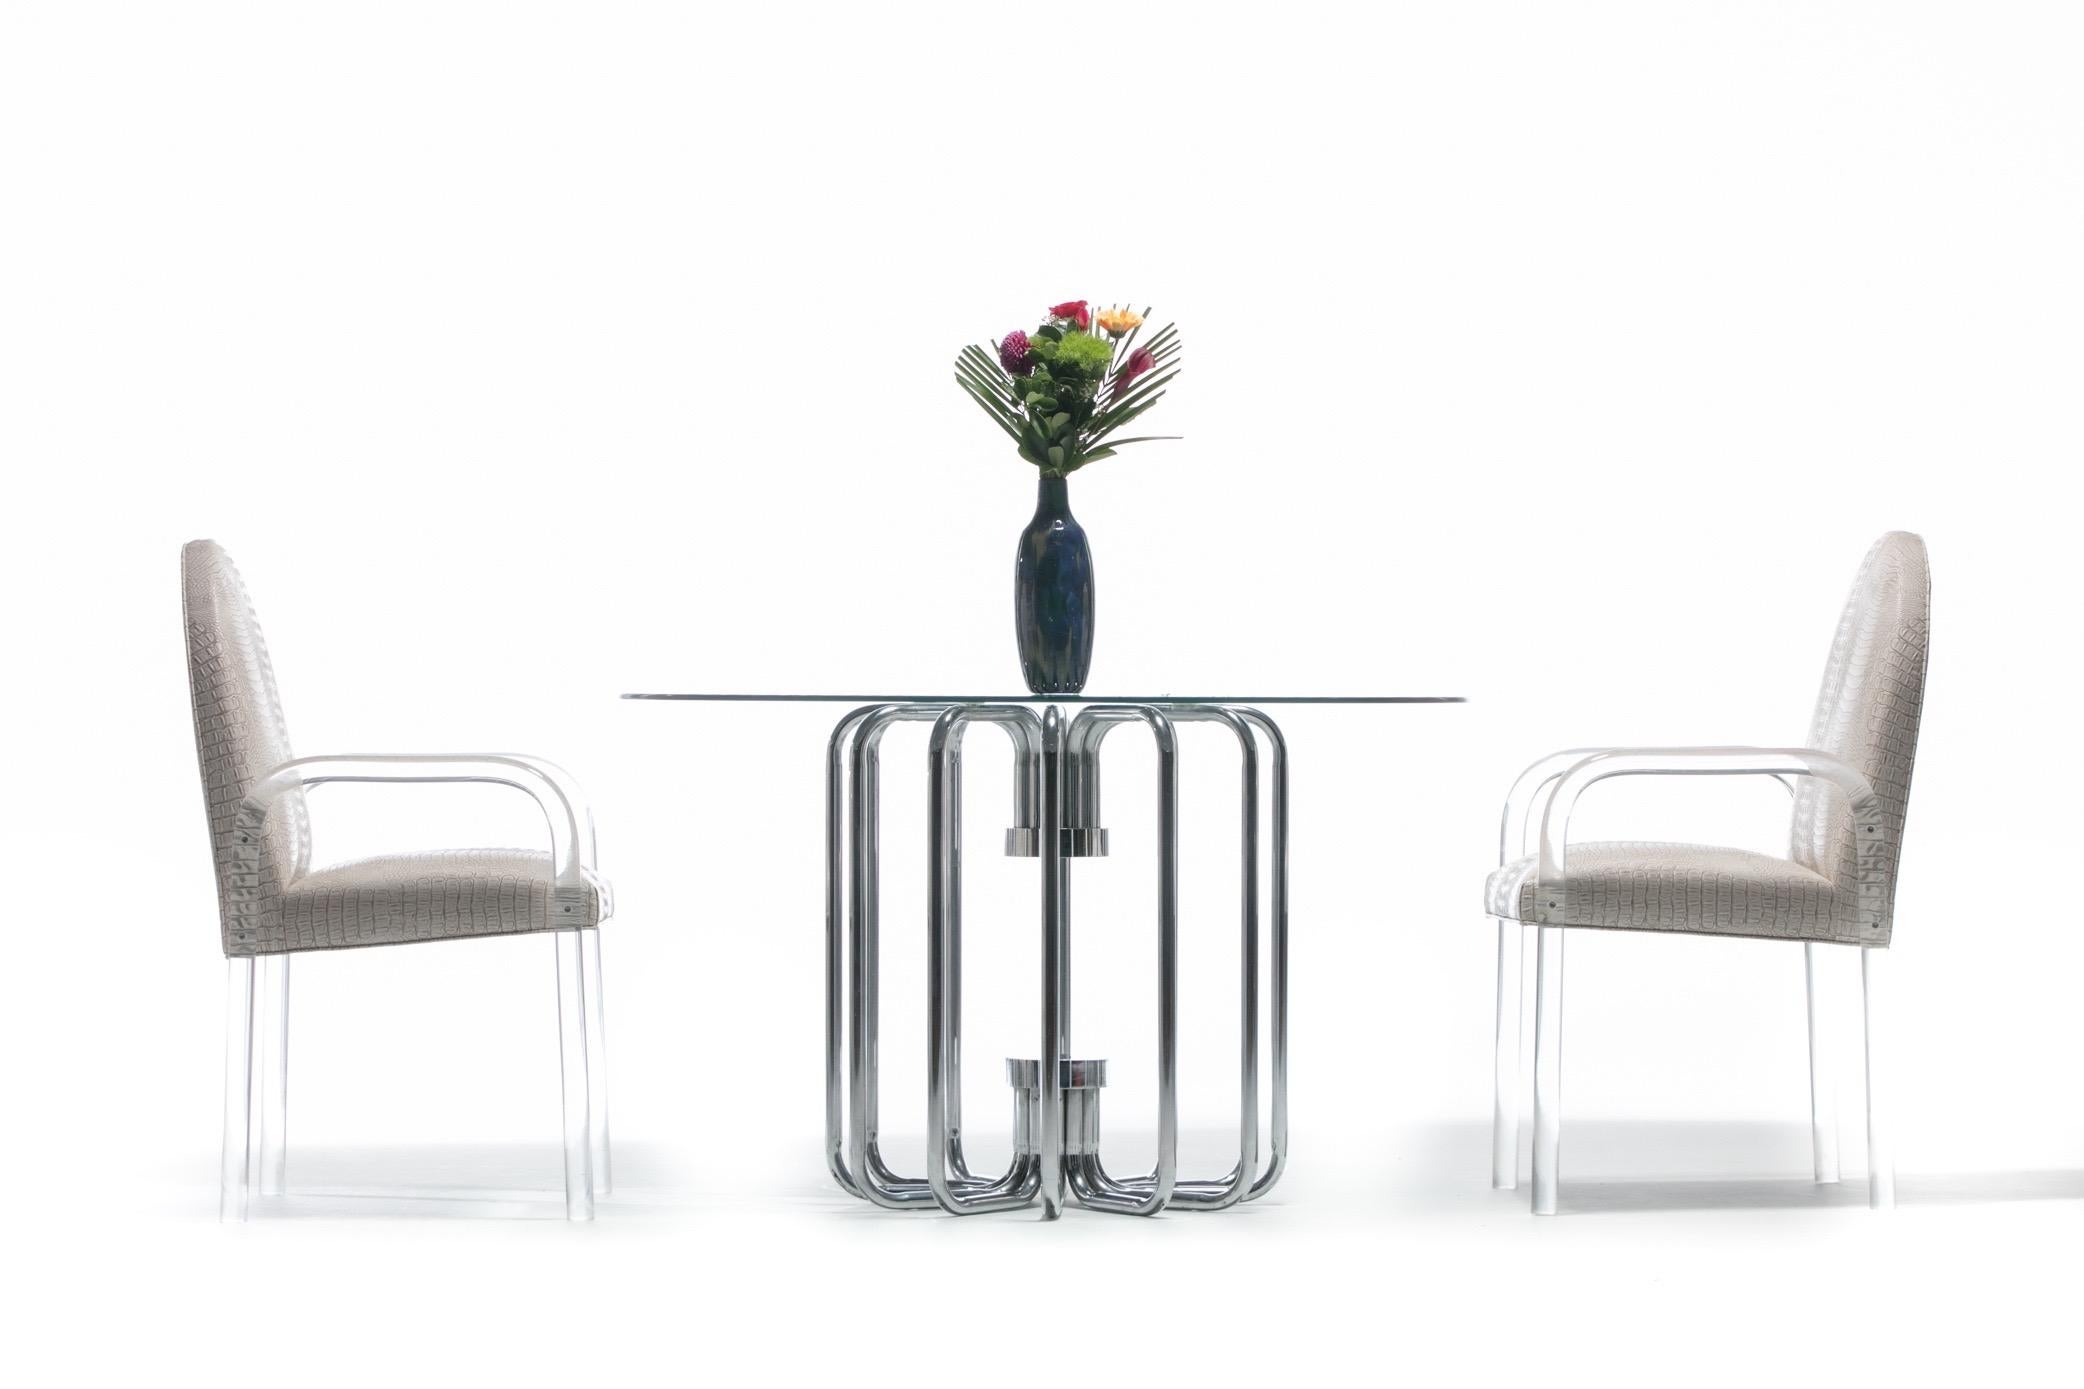 Modern sleek and sculptural chrome 1970s tubular dining or center table. This table is simply stunning. The photographs really capture its beauty. Curved chrome supports reflect and add a sense of lightness and air. A perfect choice for use as a